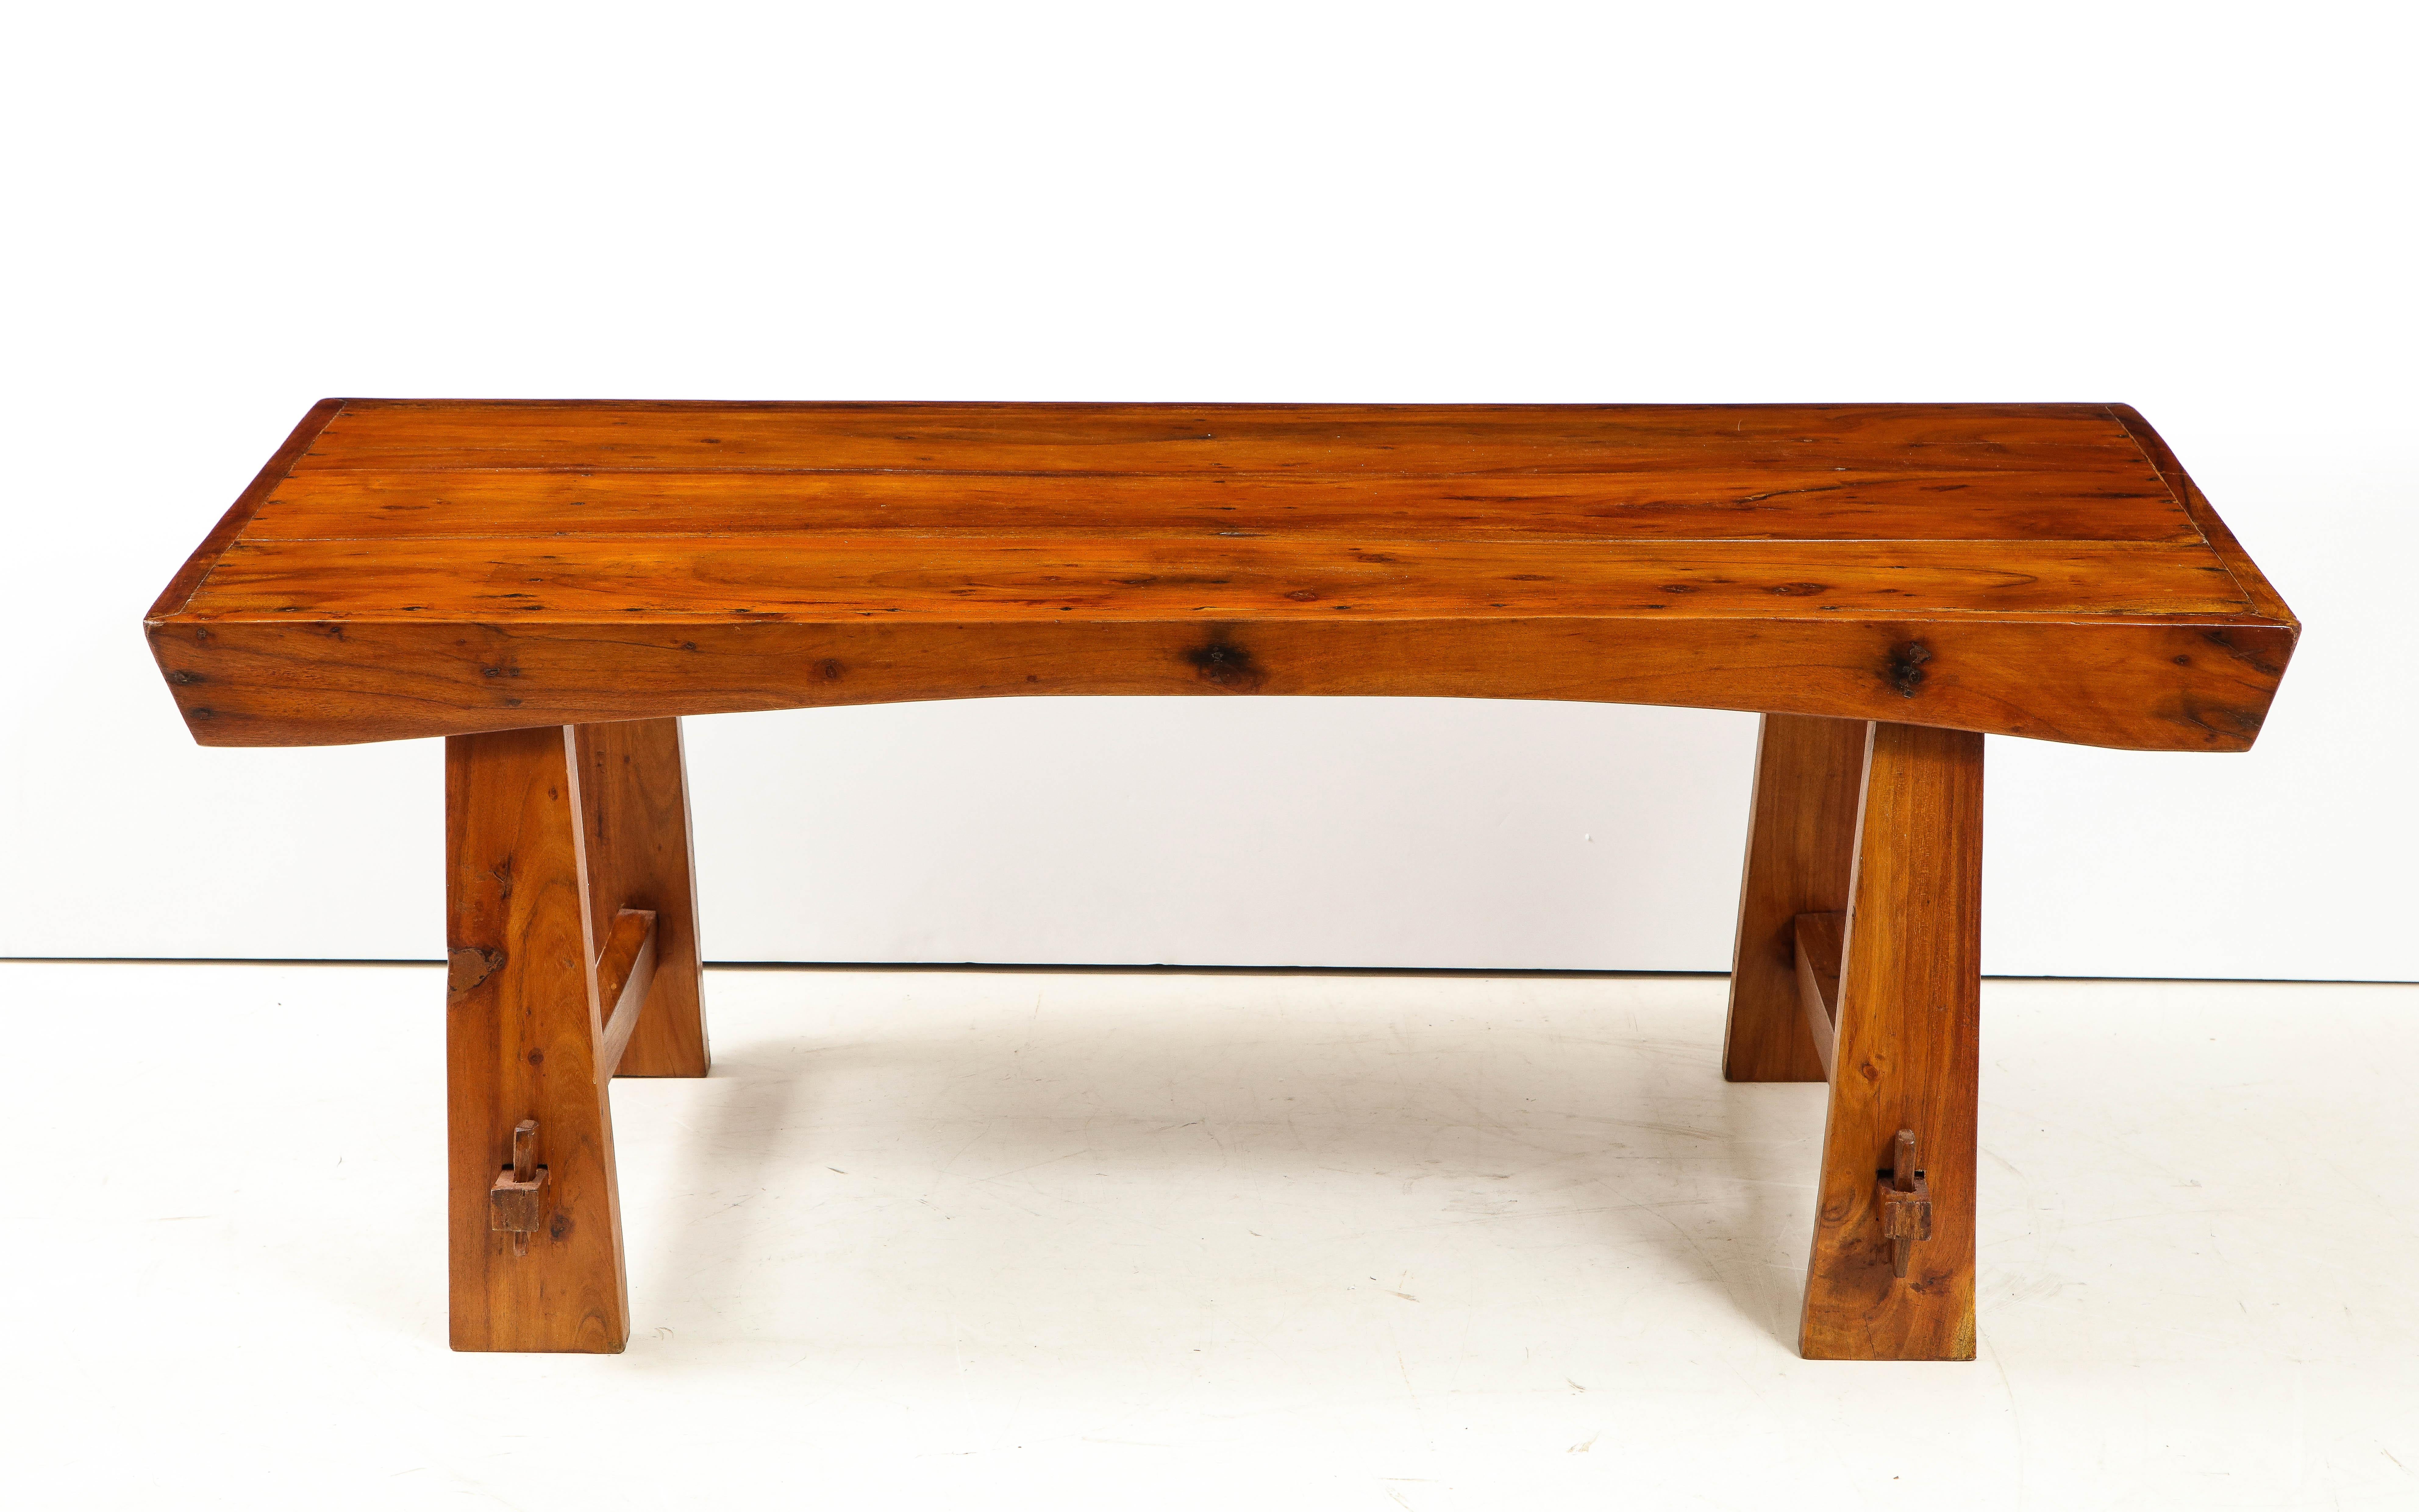 An Italian 1950s Folk Art solid walnut coffee table; grand in size and scale; this rustic piece evokes a Wabi-sabi organic modern feel for a chalet or condo in the sky. Artisan piece from Italy.
Size: 20